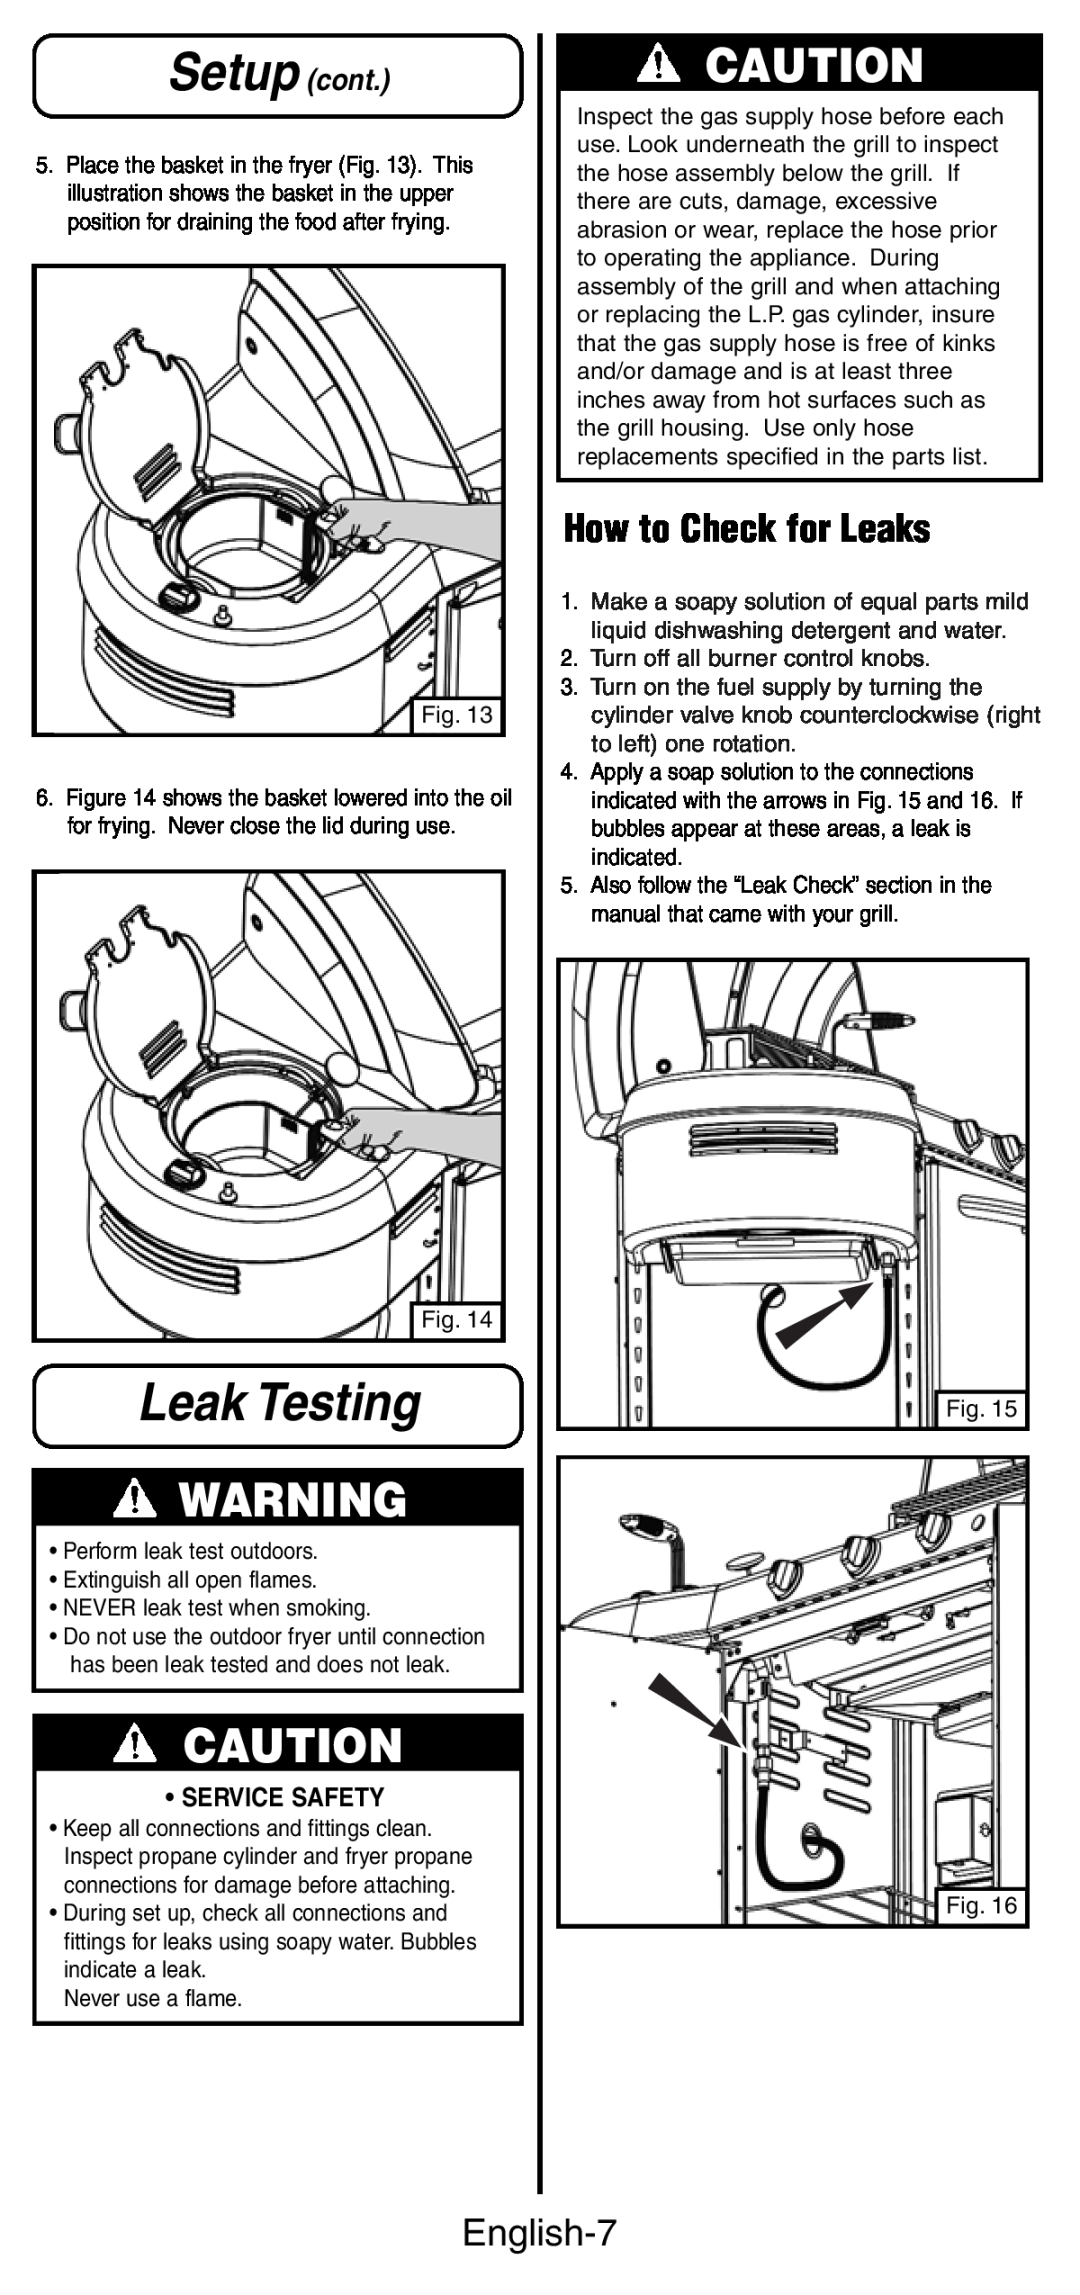 Coleman 9994 instruction manual Leak Testing, How to Check for Leaks, English-7, Setup cont, Service Safety 